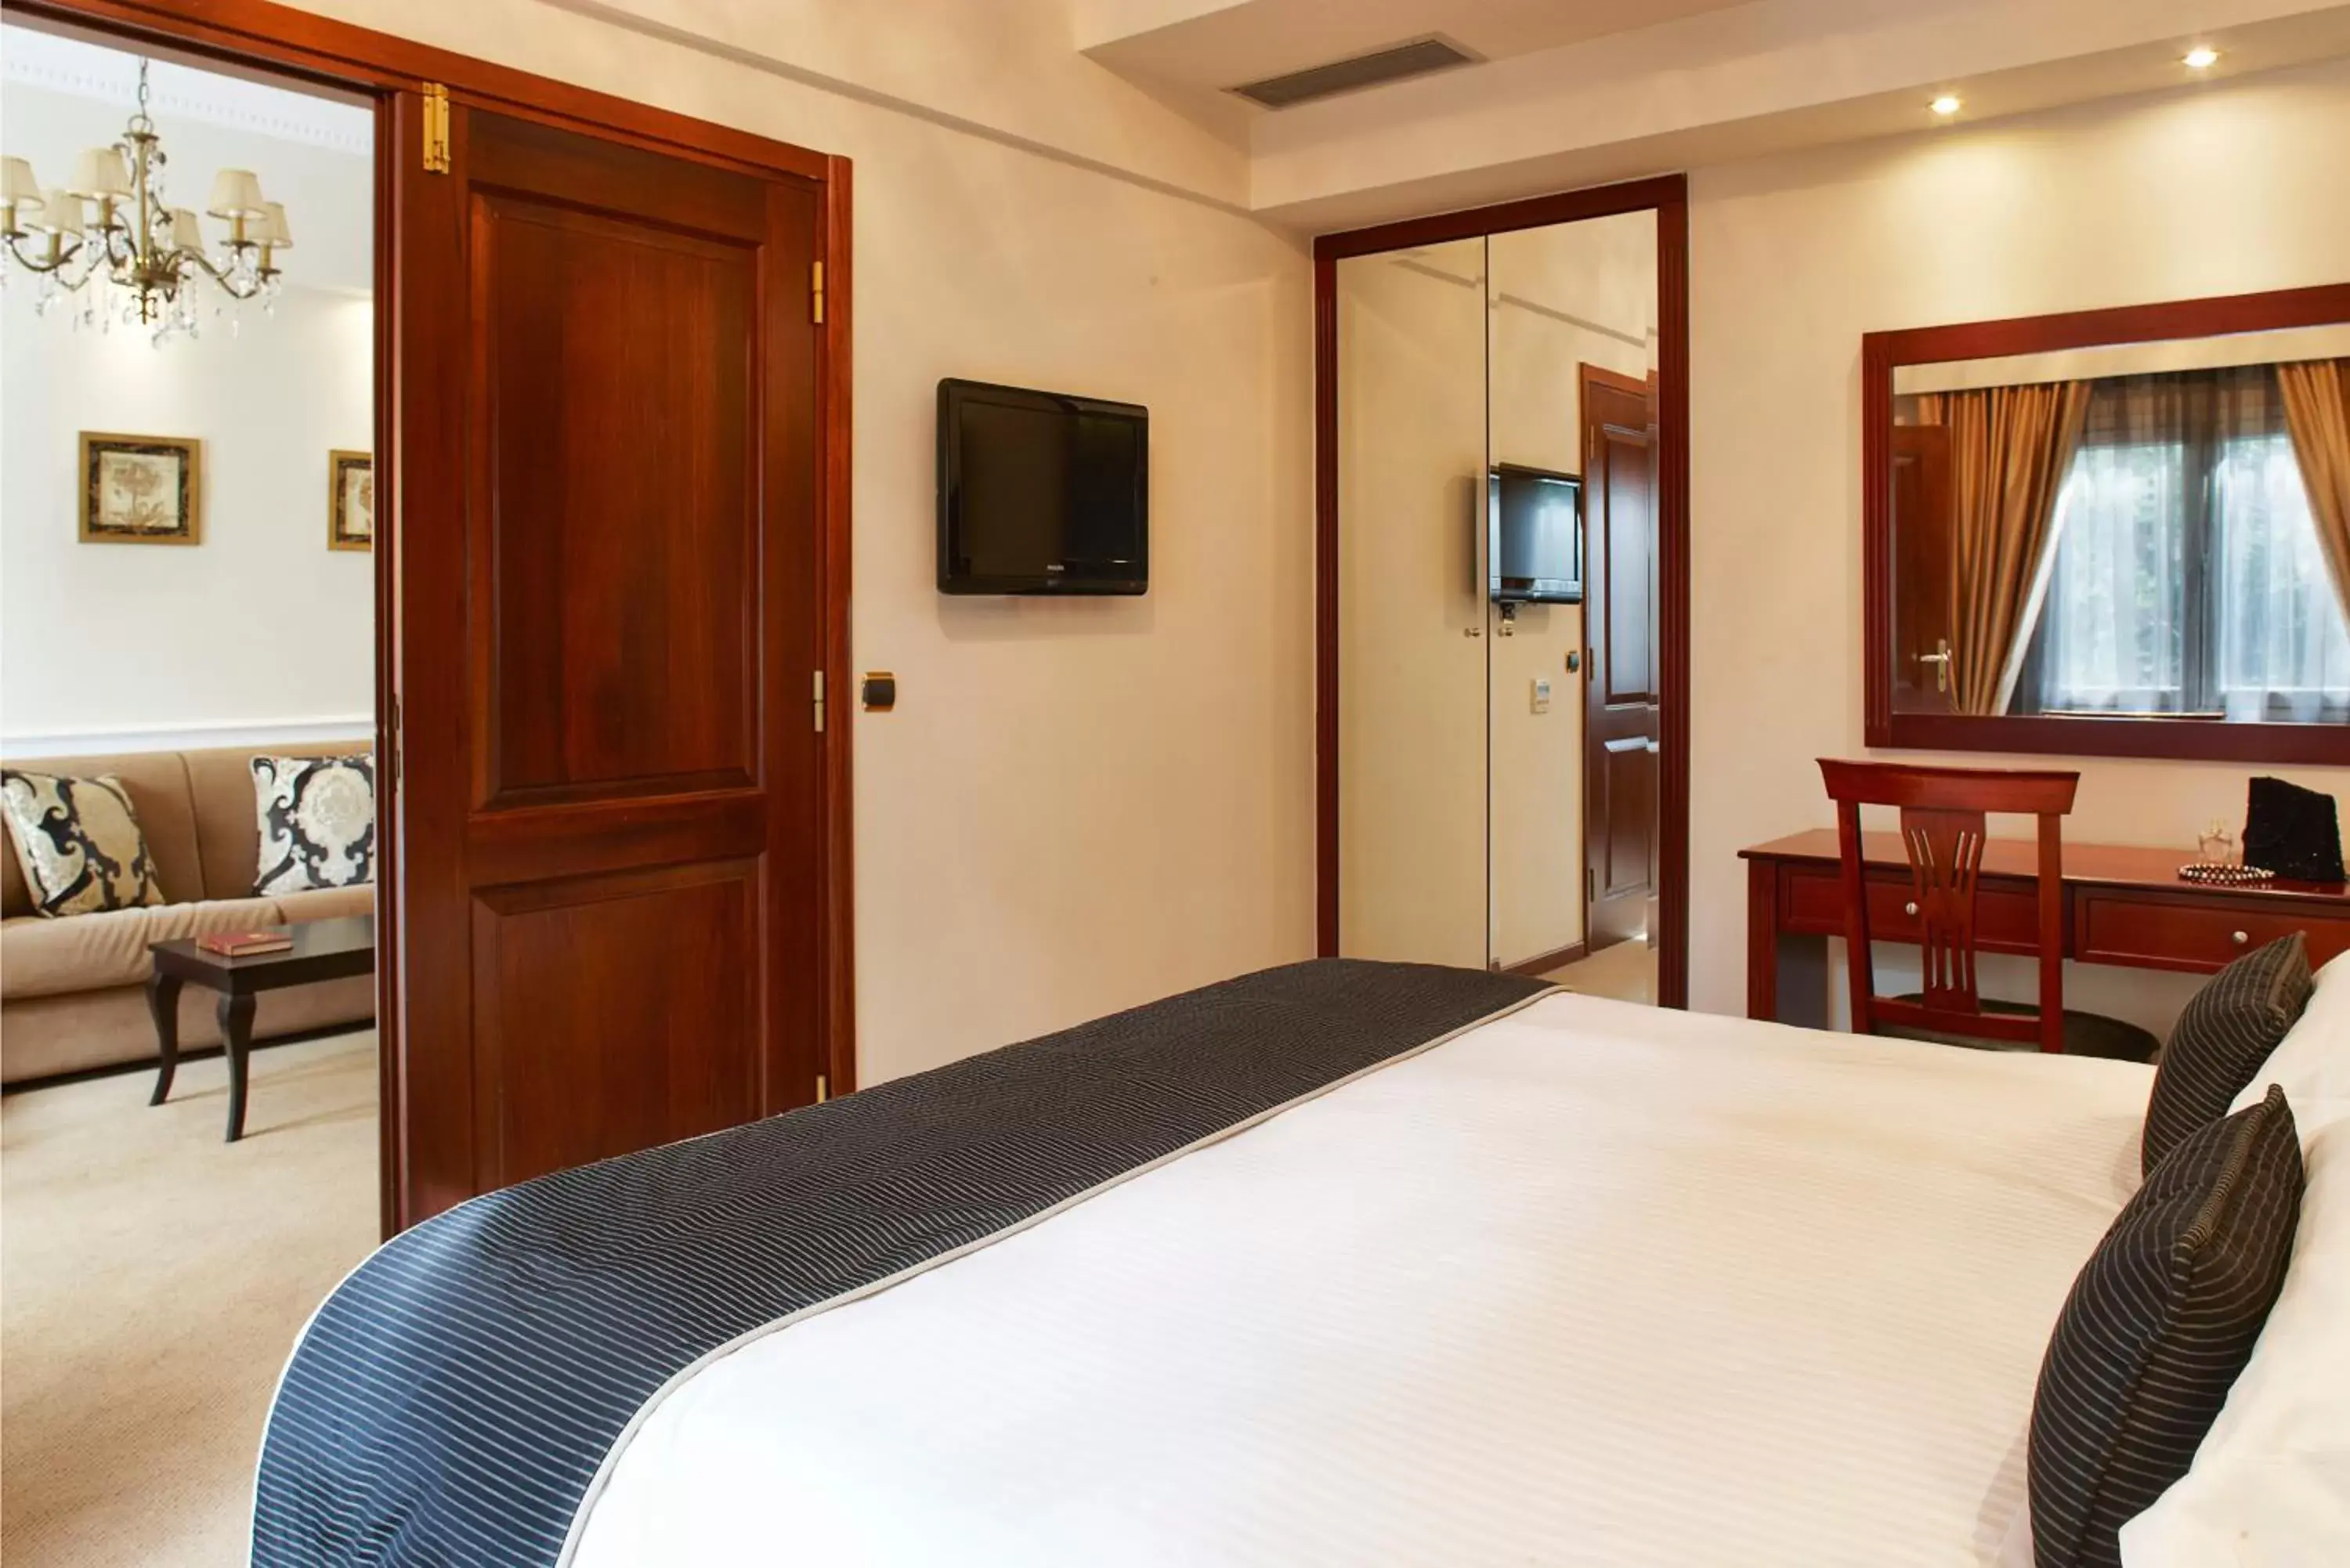 Bed in Ava Hotel and Suites